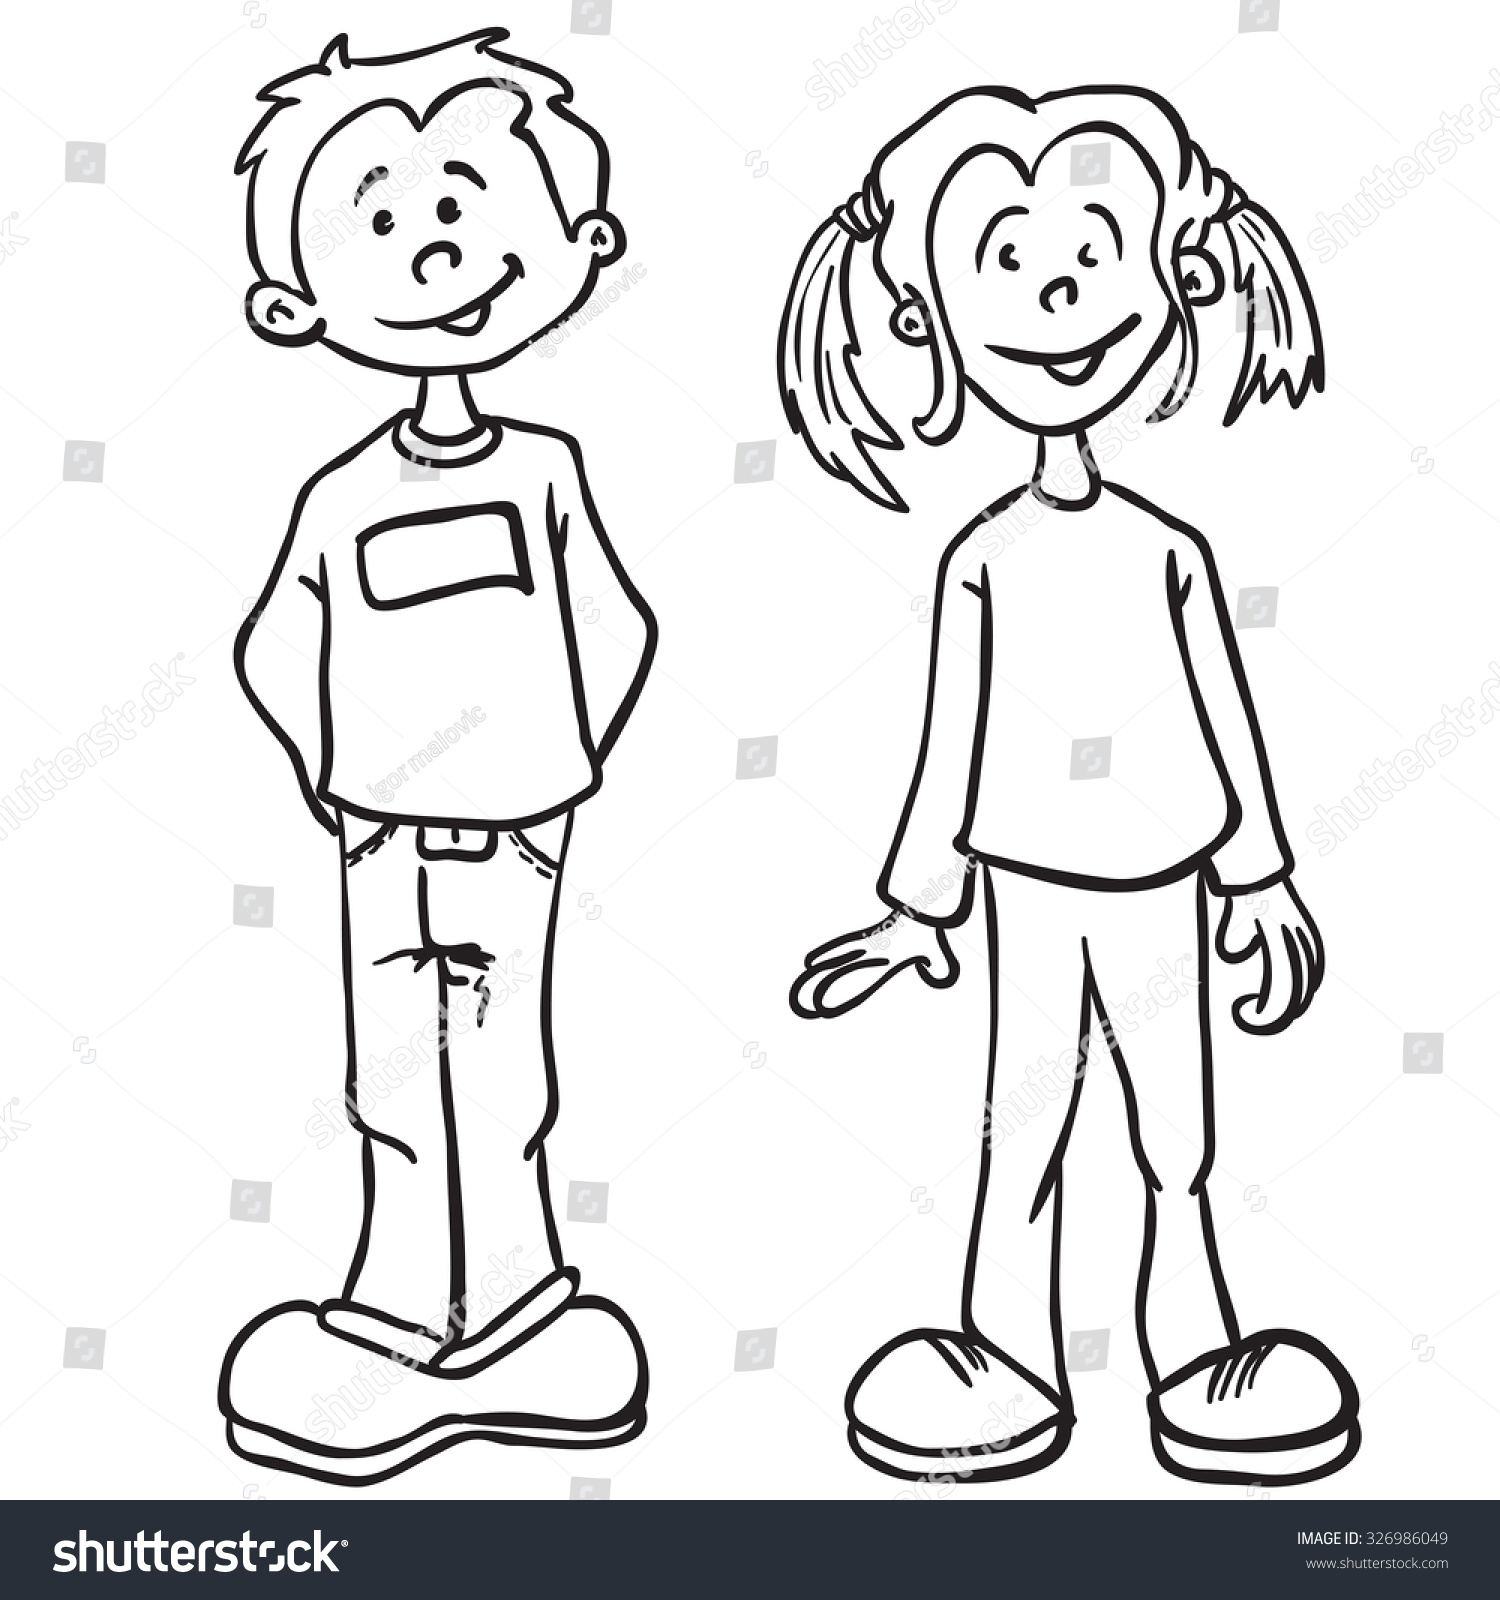 clipart boy and girl black and white - photo #24